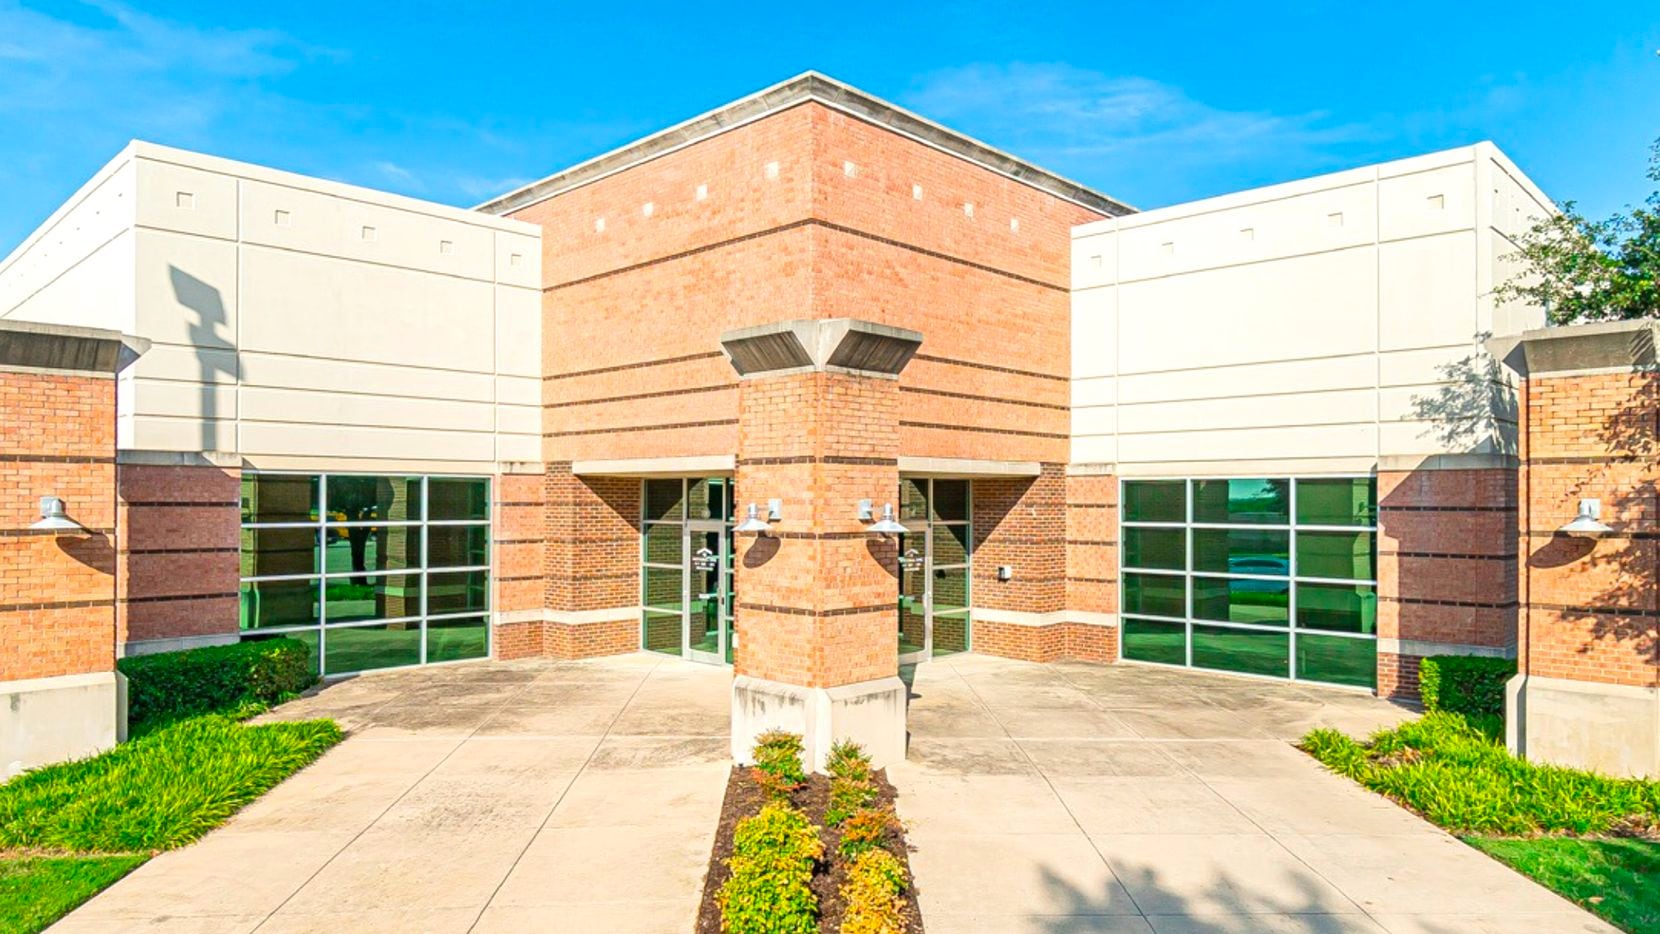 Stanton Road Capital just purchased the Esters 114 Business Center near S.H. 114.